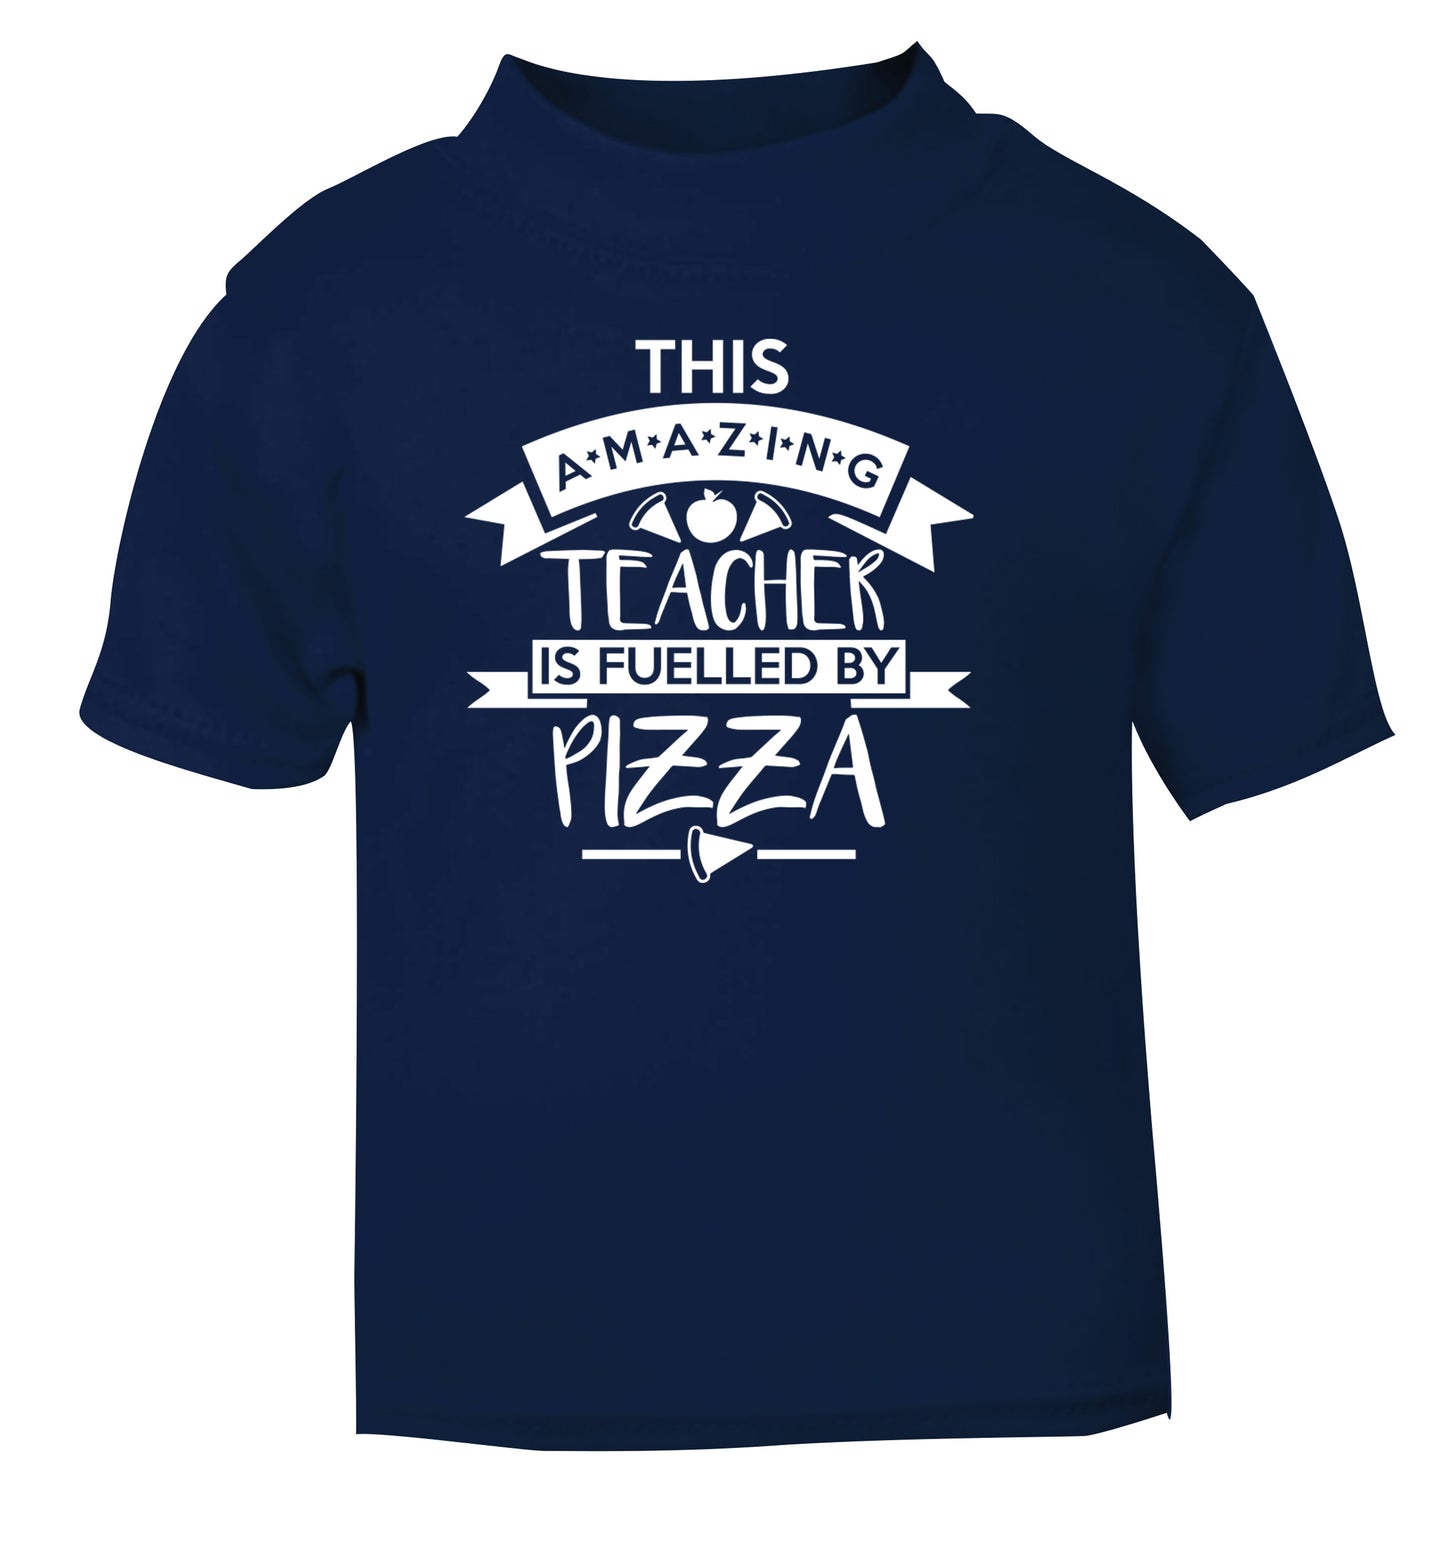 This amazing teacher is fuelled by pizza navy Baby Toddler Tshirt 2 Years